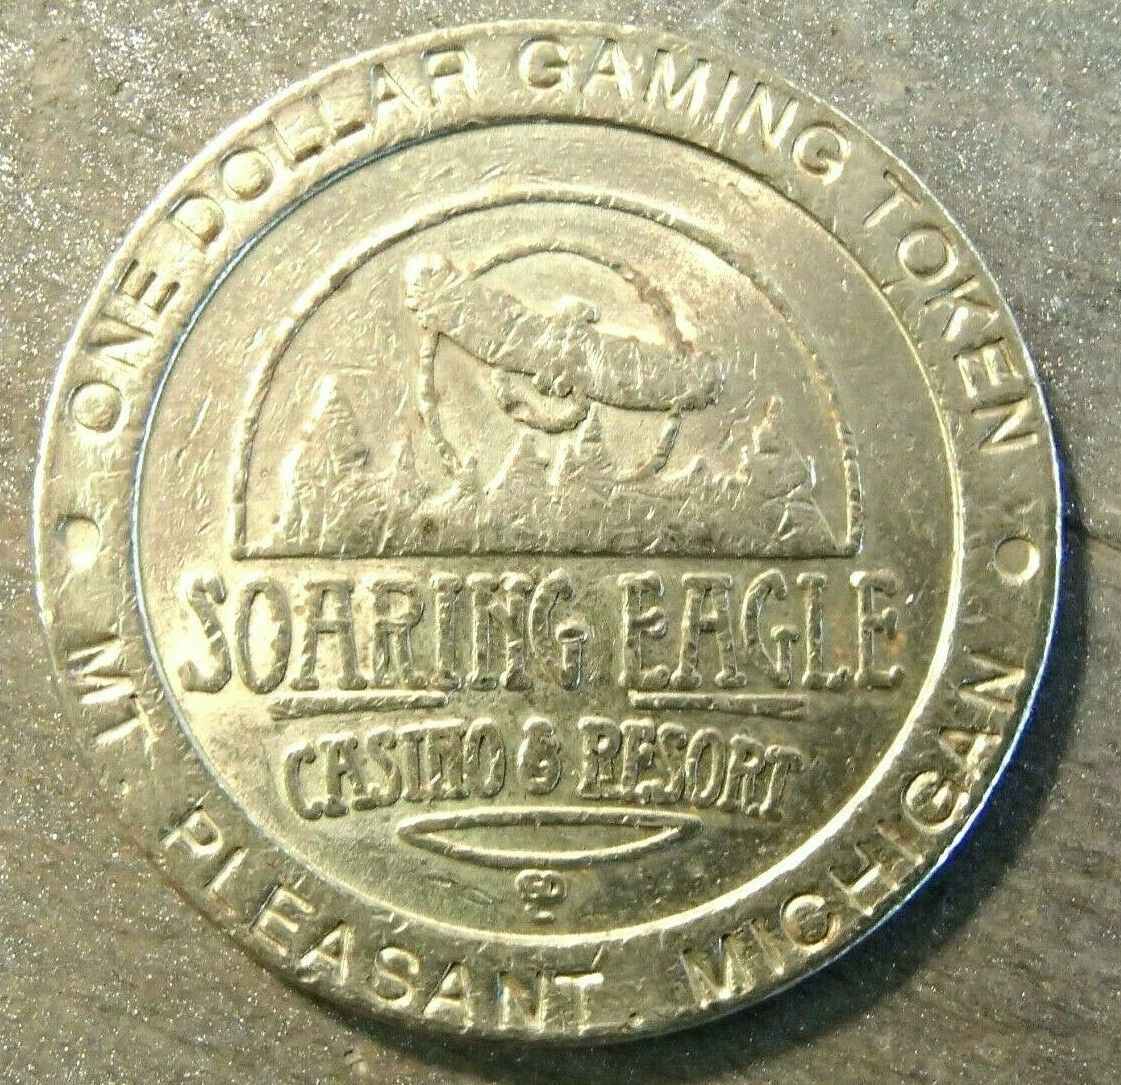 Soaring Eagle Casino At Mt. Pleasant, Mi, $1 Gaming Token **lightly Played**